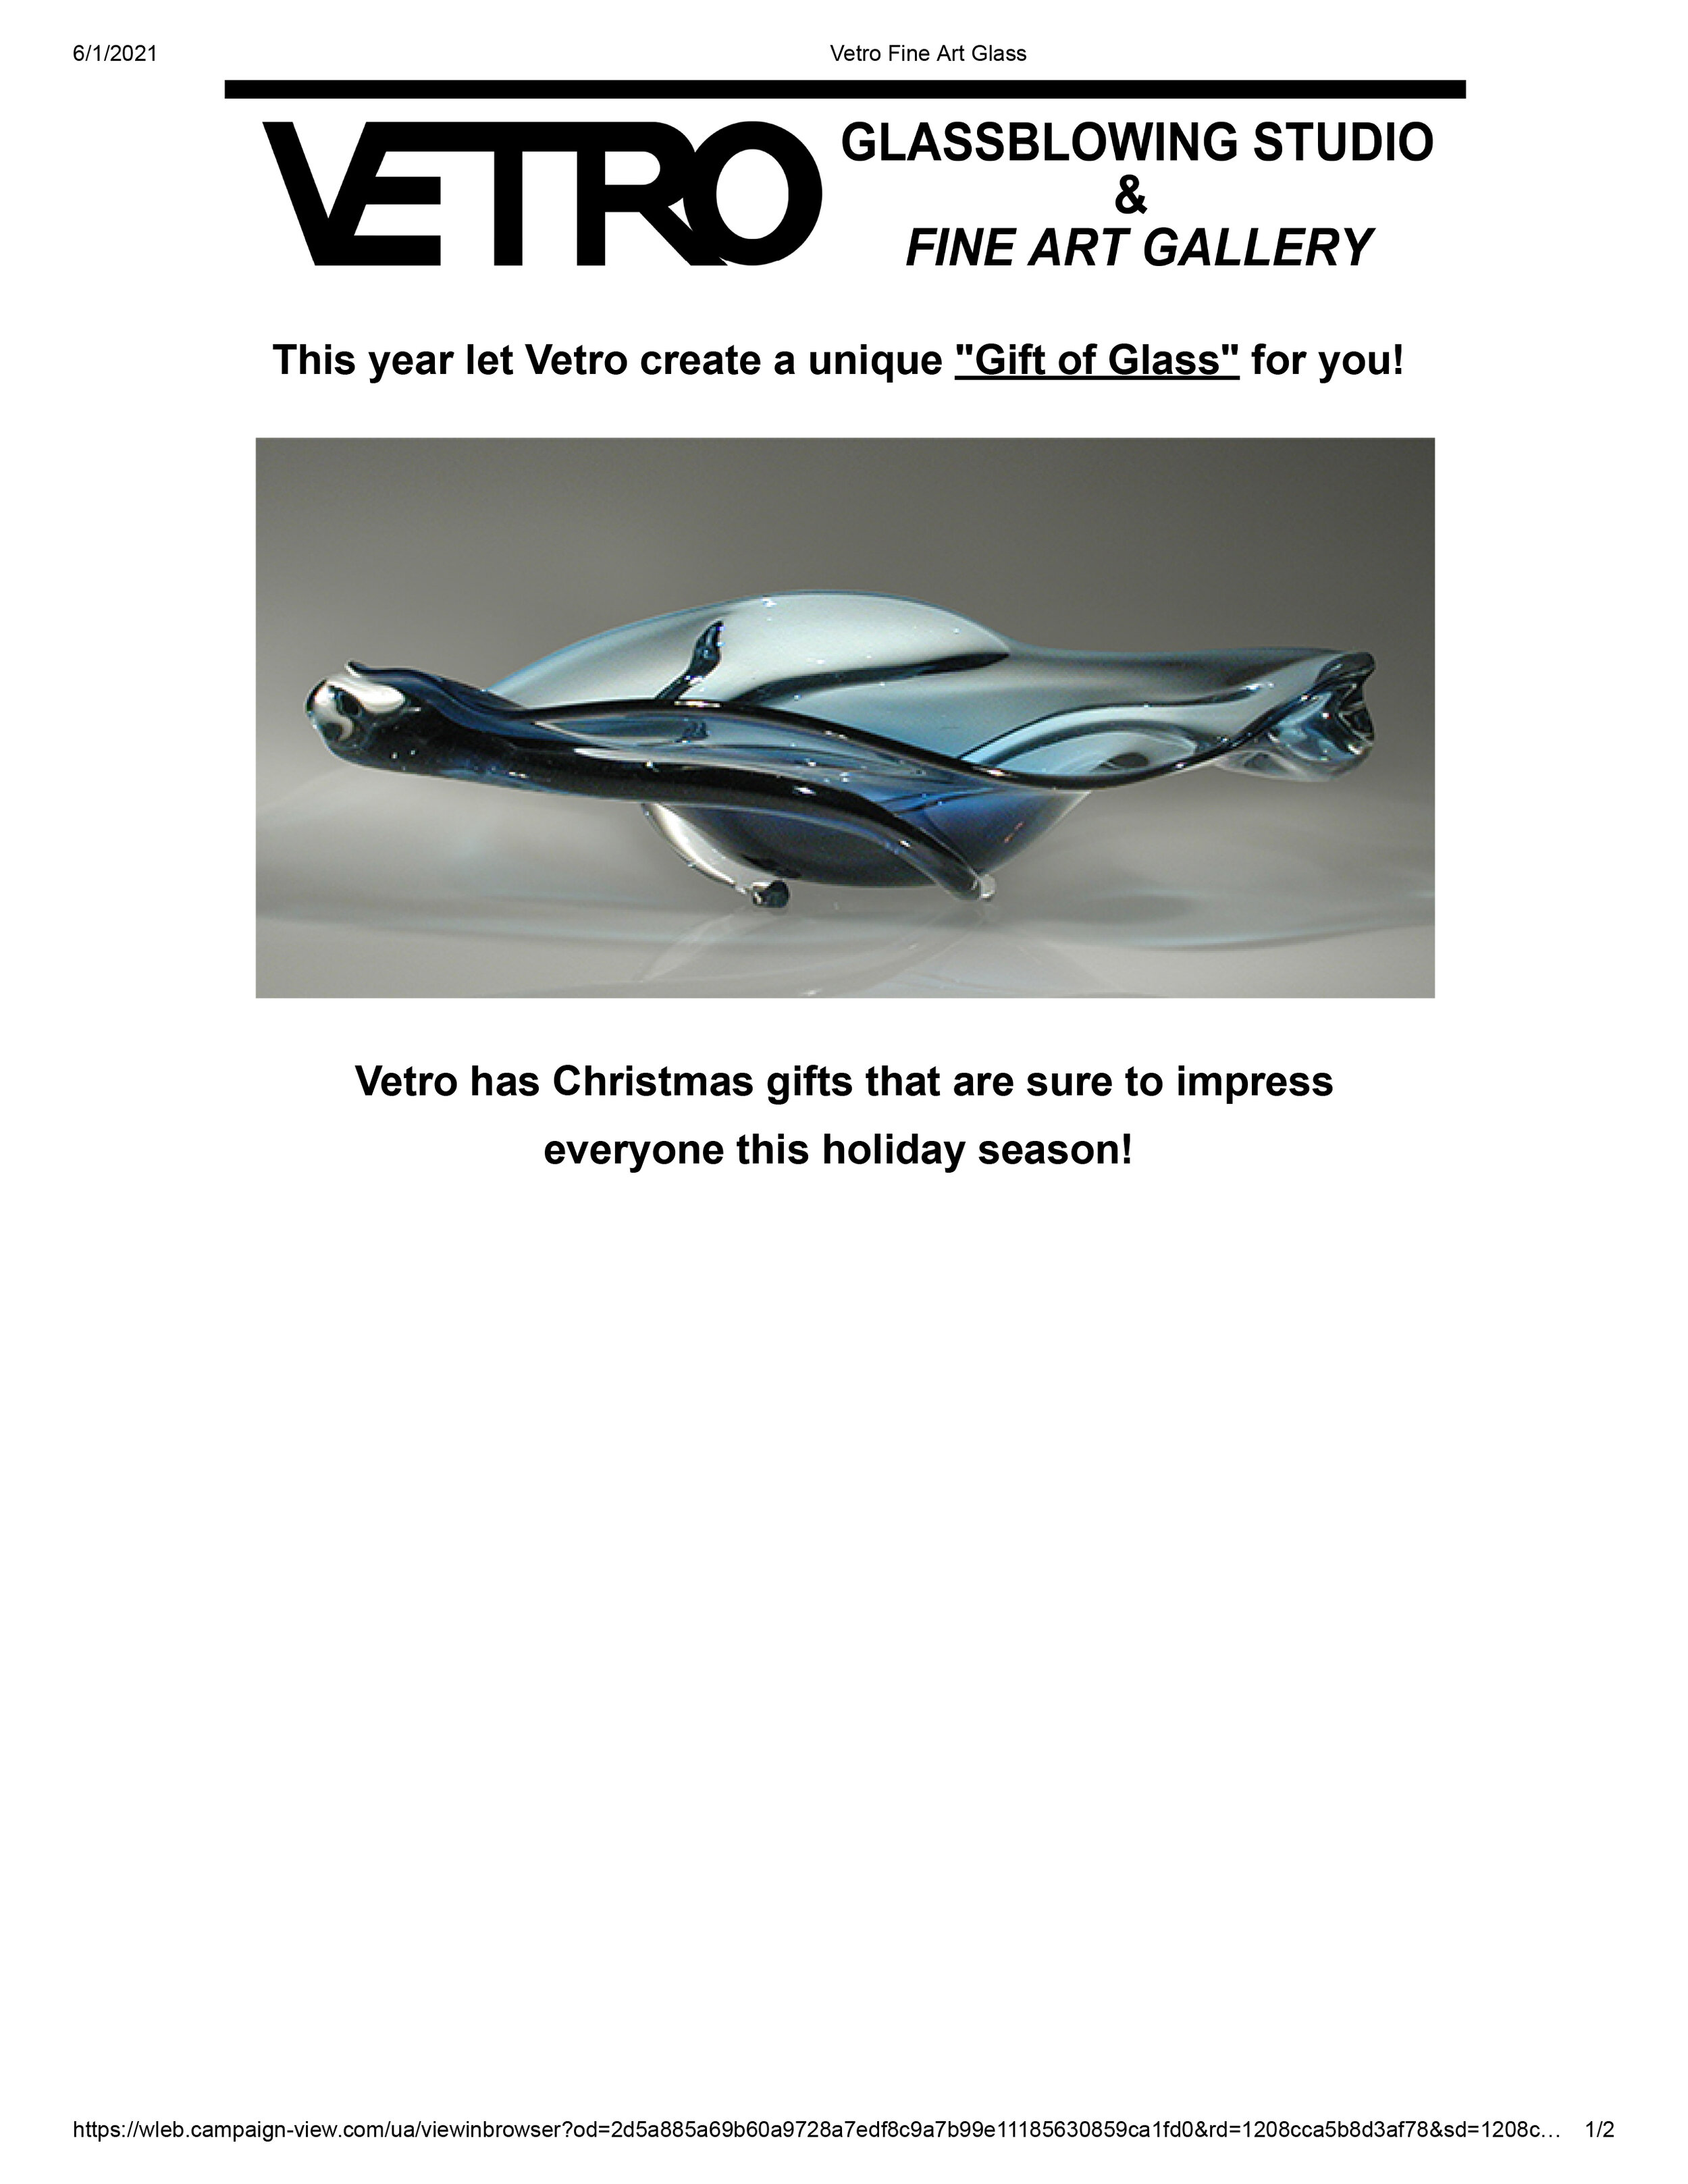 Email Campaigns -Vetro Glassblowing Studio - This year let Vetro create a unique Gift of Glass for you-1.jpg